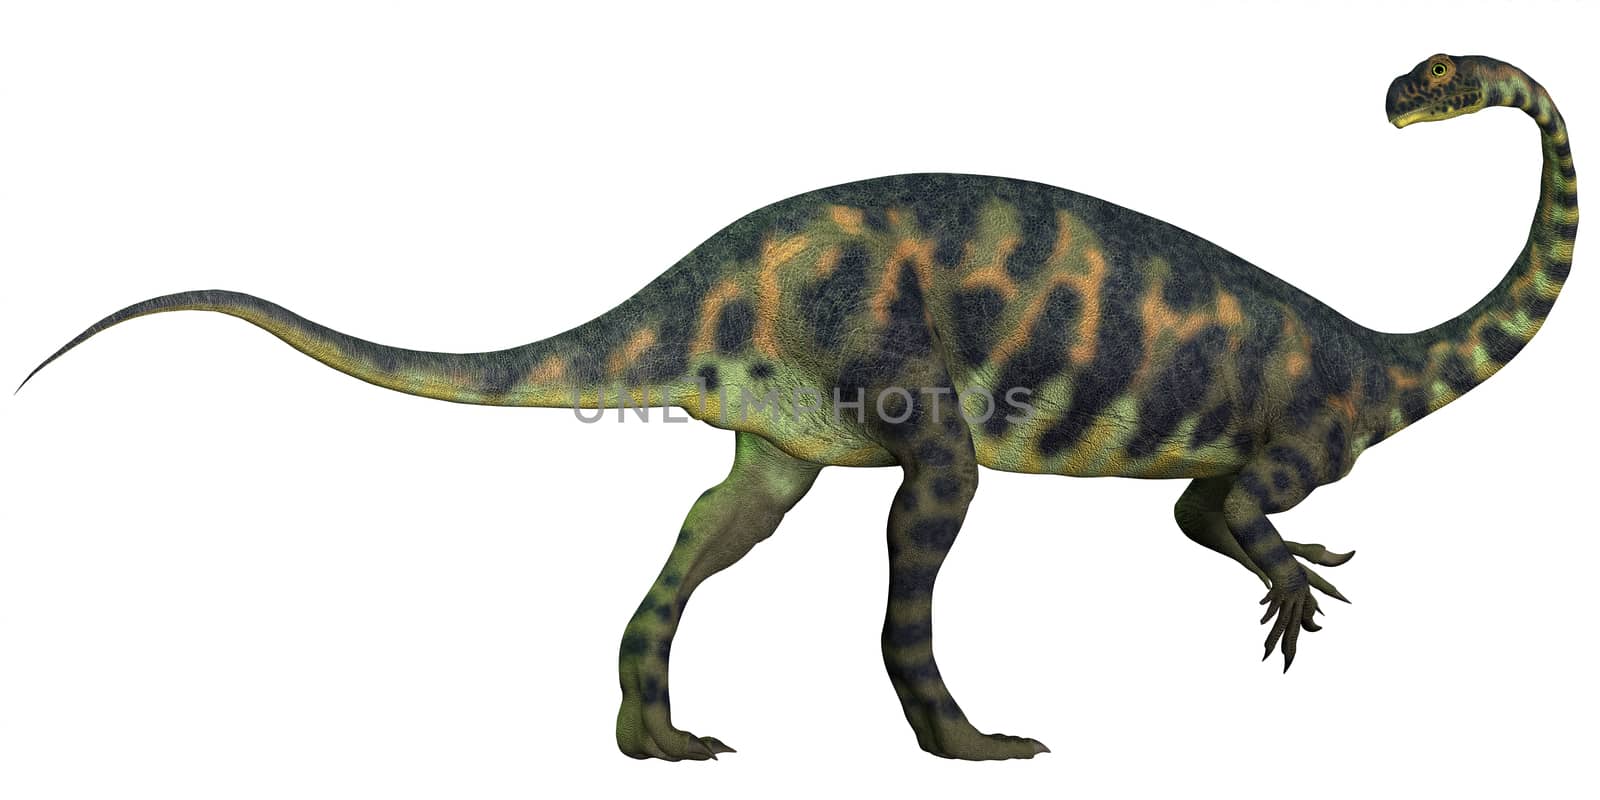 Massospondylus was a prosauropod dinosaur from the Jurassic Age of Africa and was a herbivore.